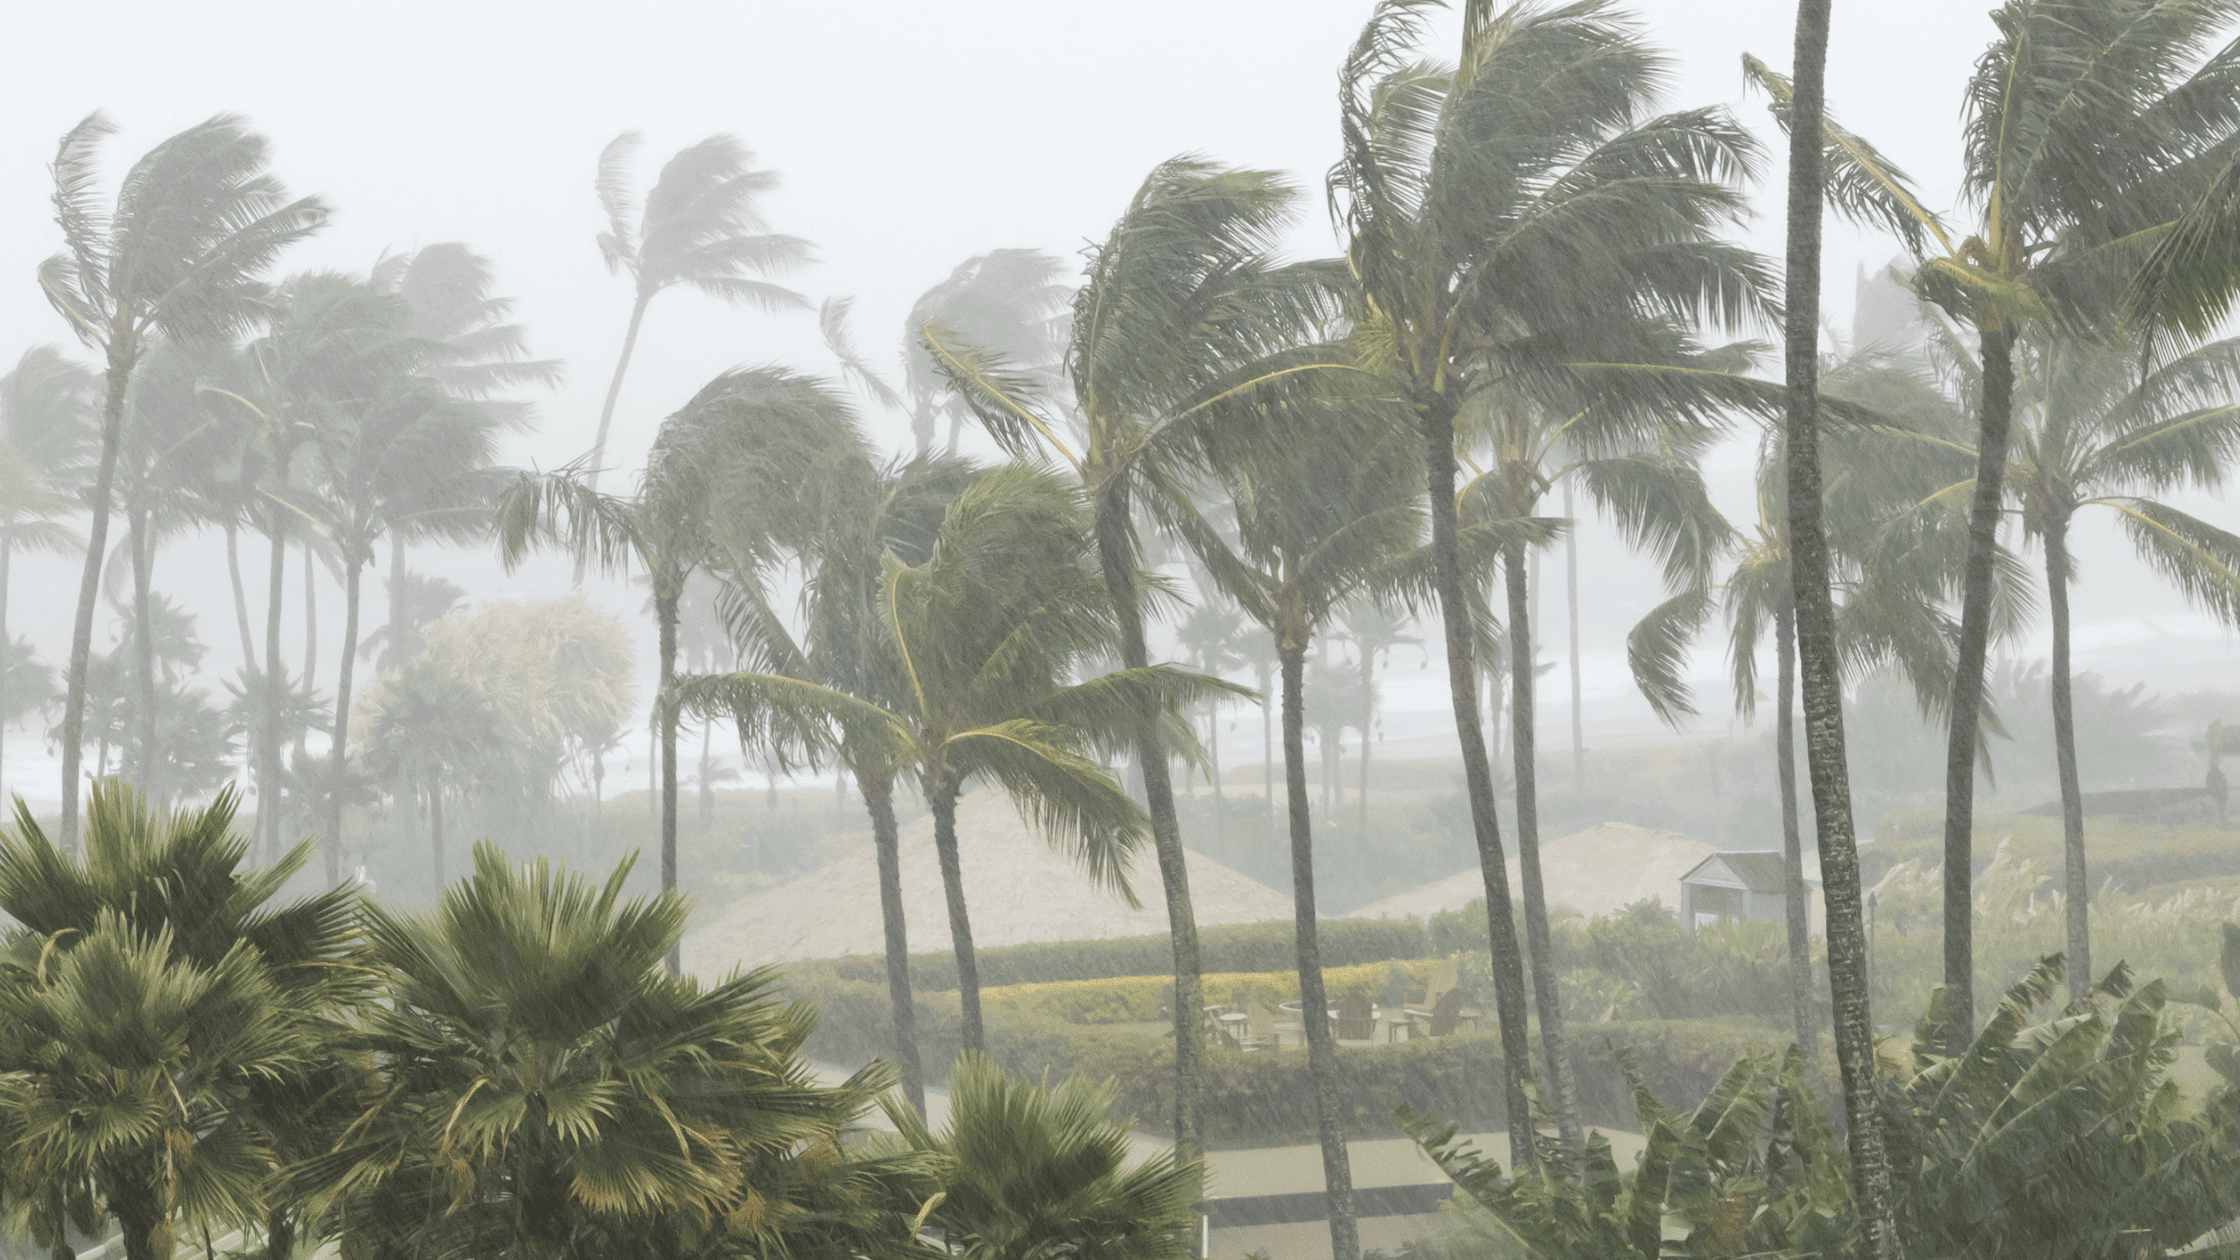 Photo of palm trees in heavy winds and rains.